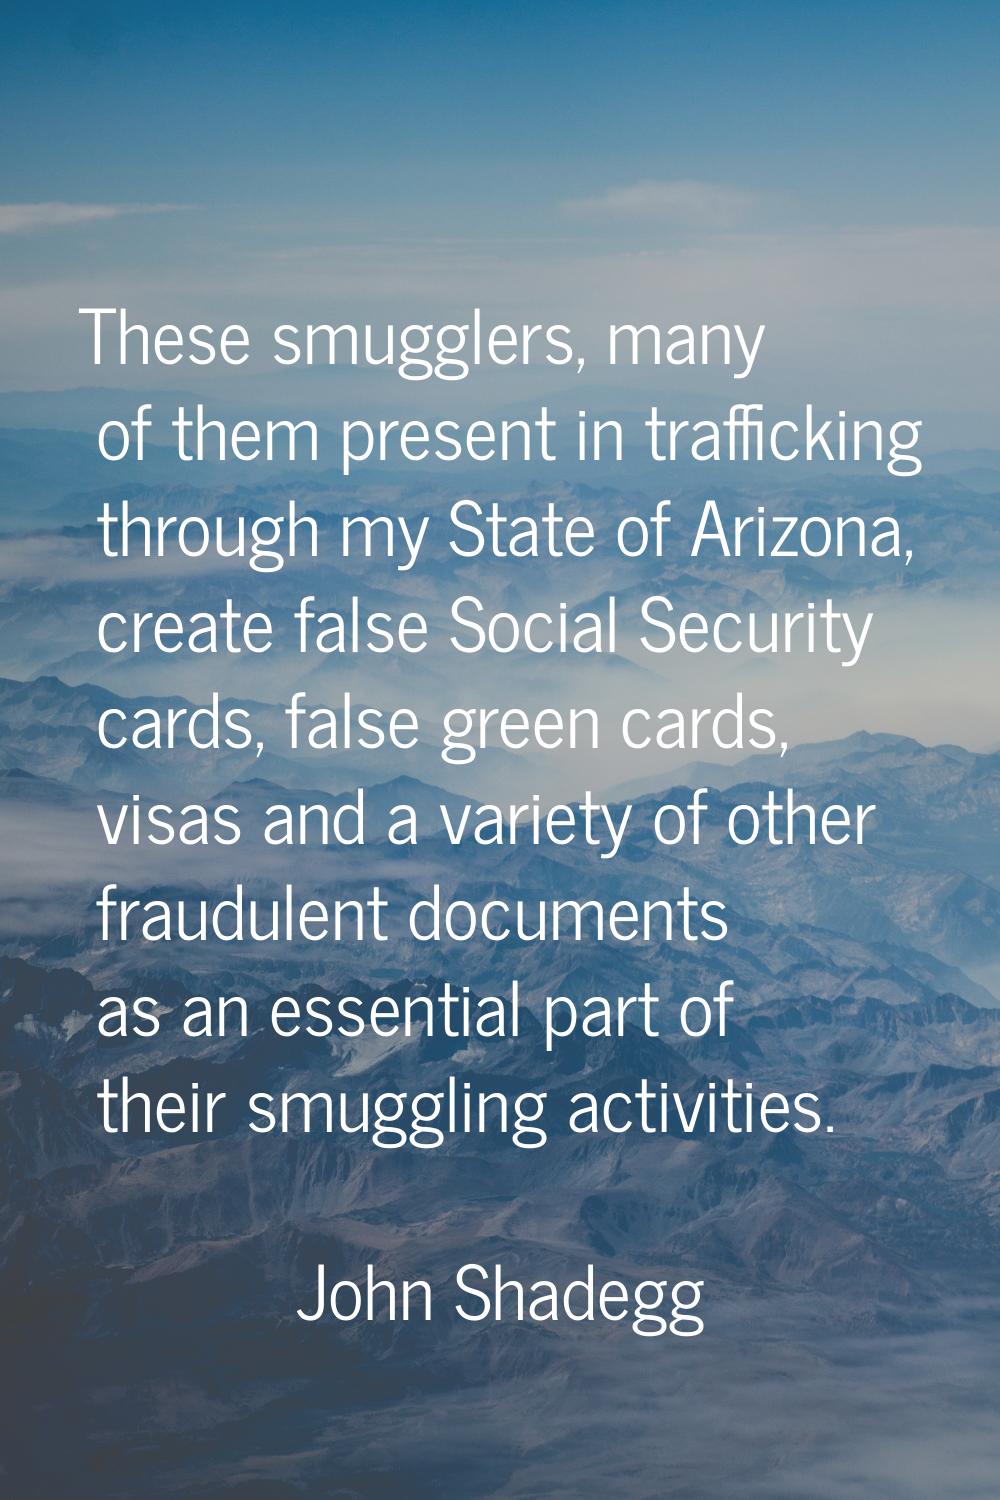 These smugglers, many of them present in trafficking through my State of Arizona, create false Soci